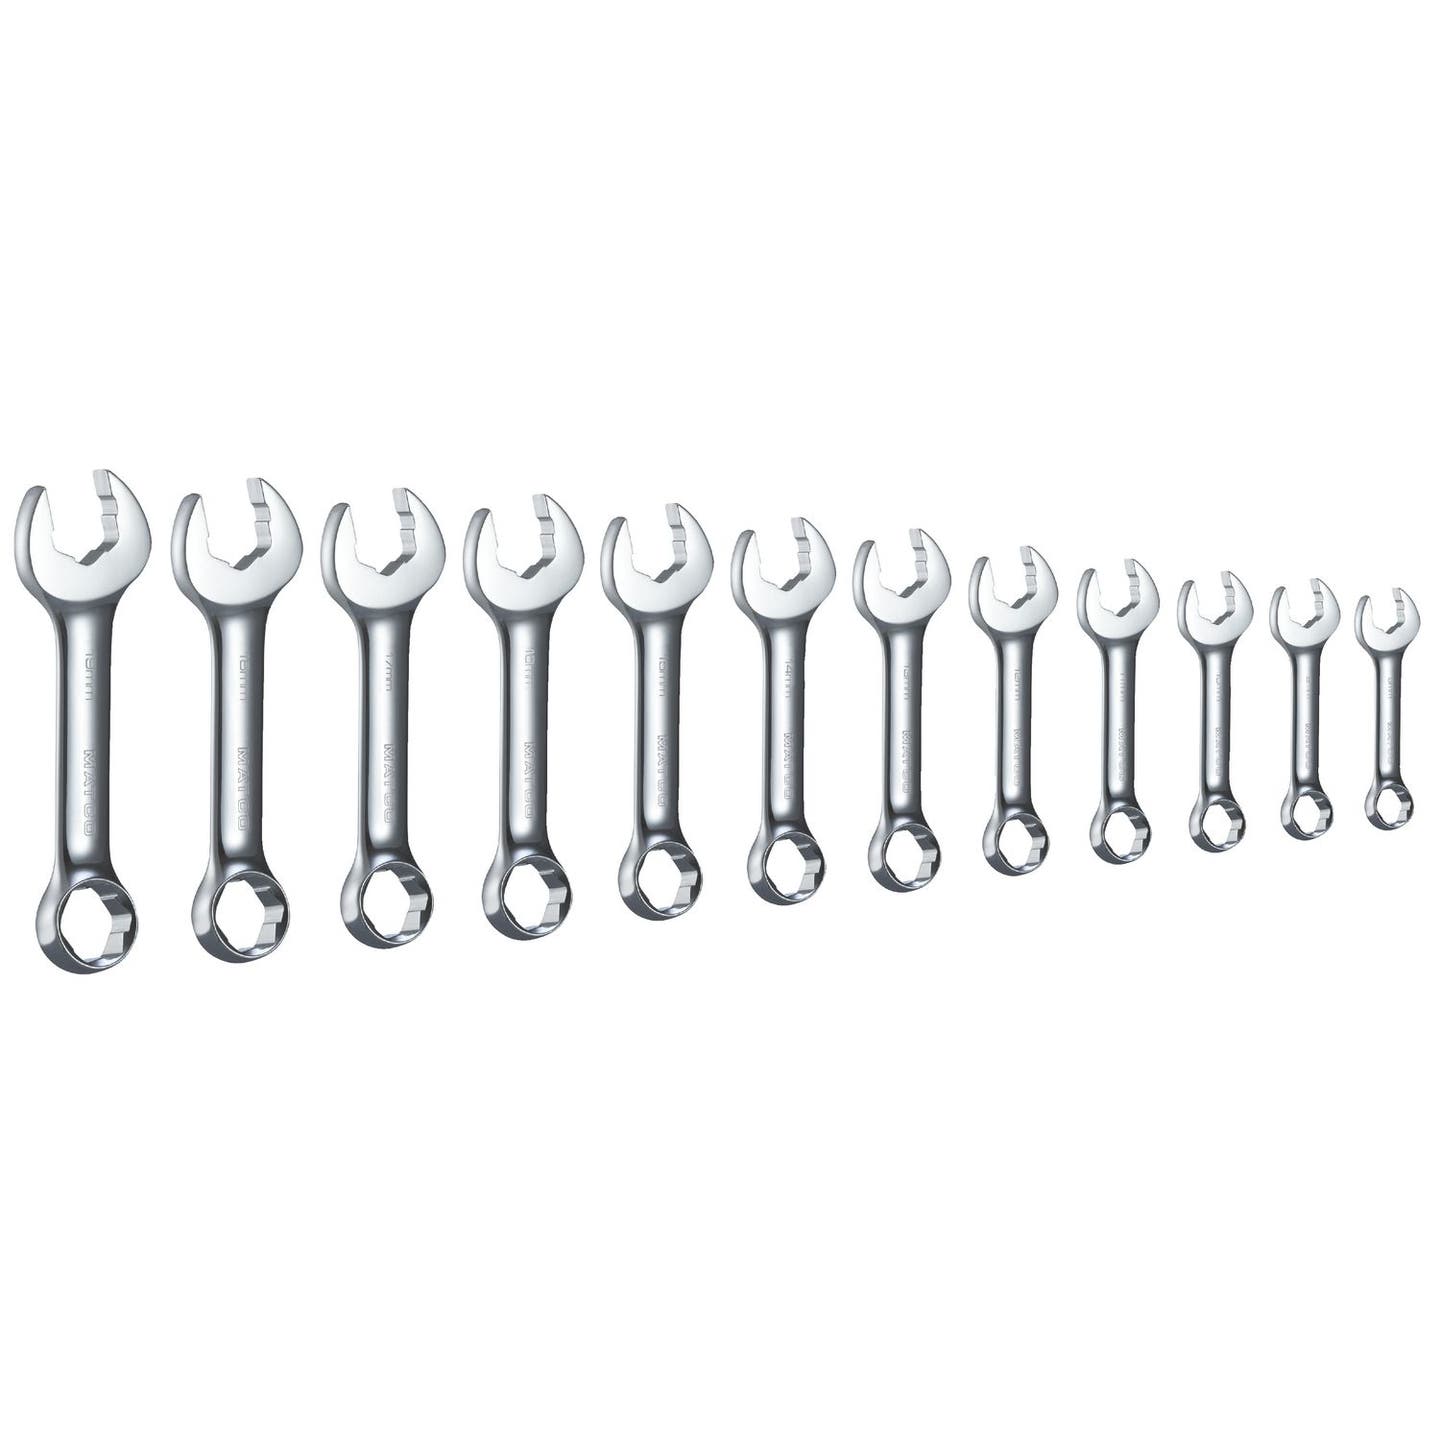 12 PIECE STUBBY METRIC HEX GRIP WRENCH SET